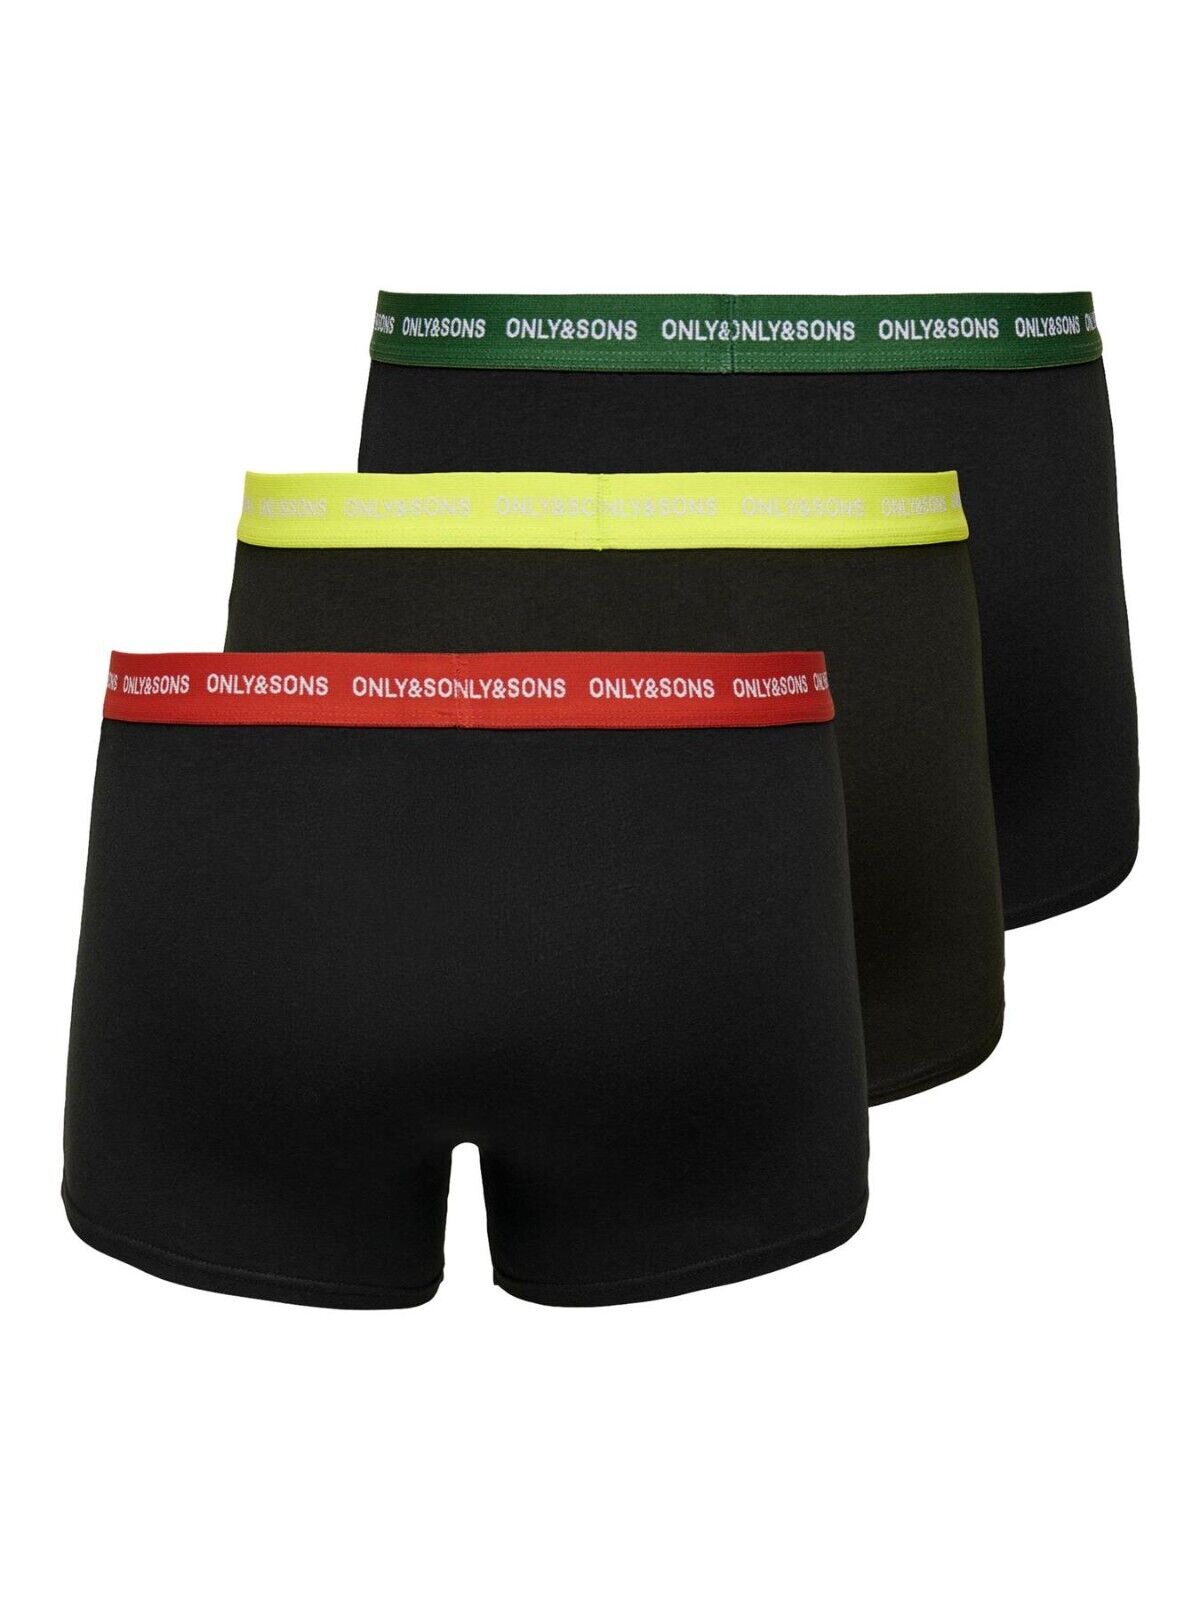 Mens Boxer Shorts Only & Sons 3 Pack Trunks Cotton Stretch Underpants Underwear